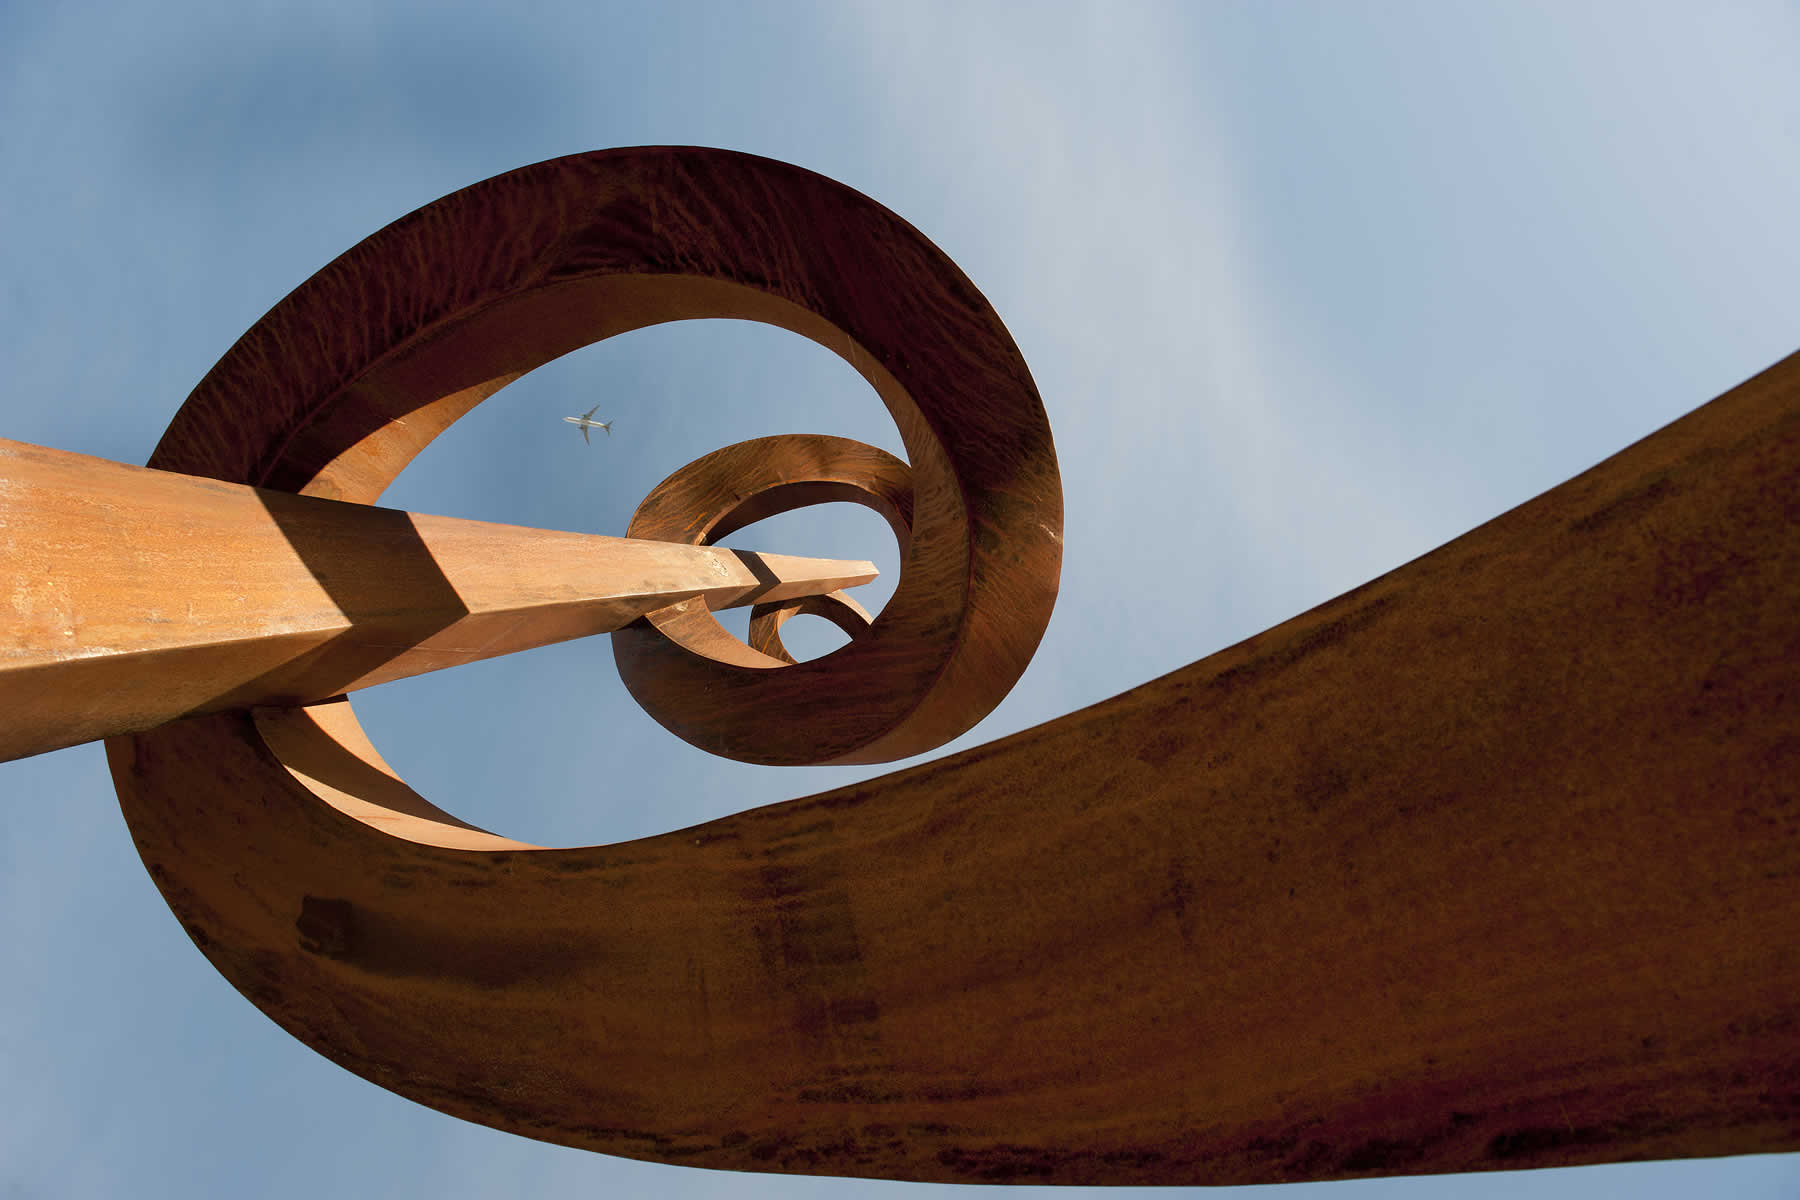 corten steel, 12m tall, commissioned by Villawood Properties for Aspire Estate, Vic